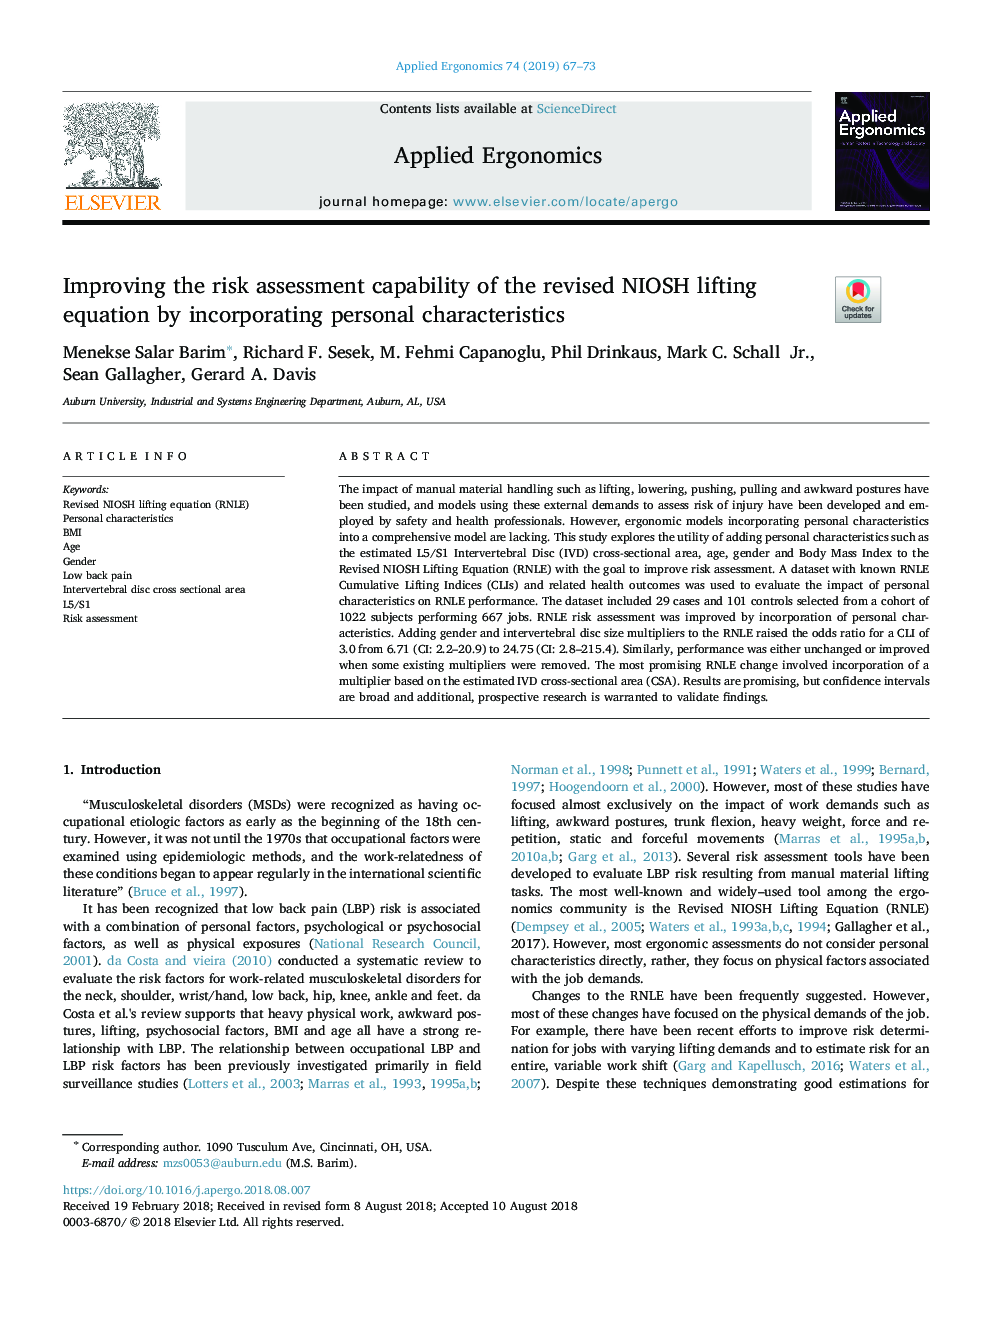 Improving the risk assessment capability of the revised NIOSH lifting equation by incorporating personal characteristics